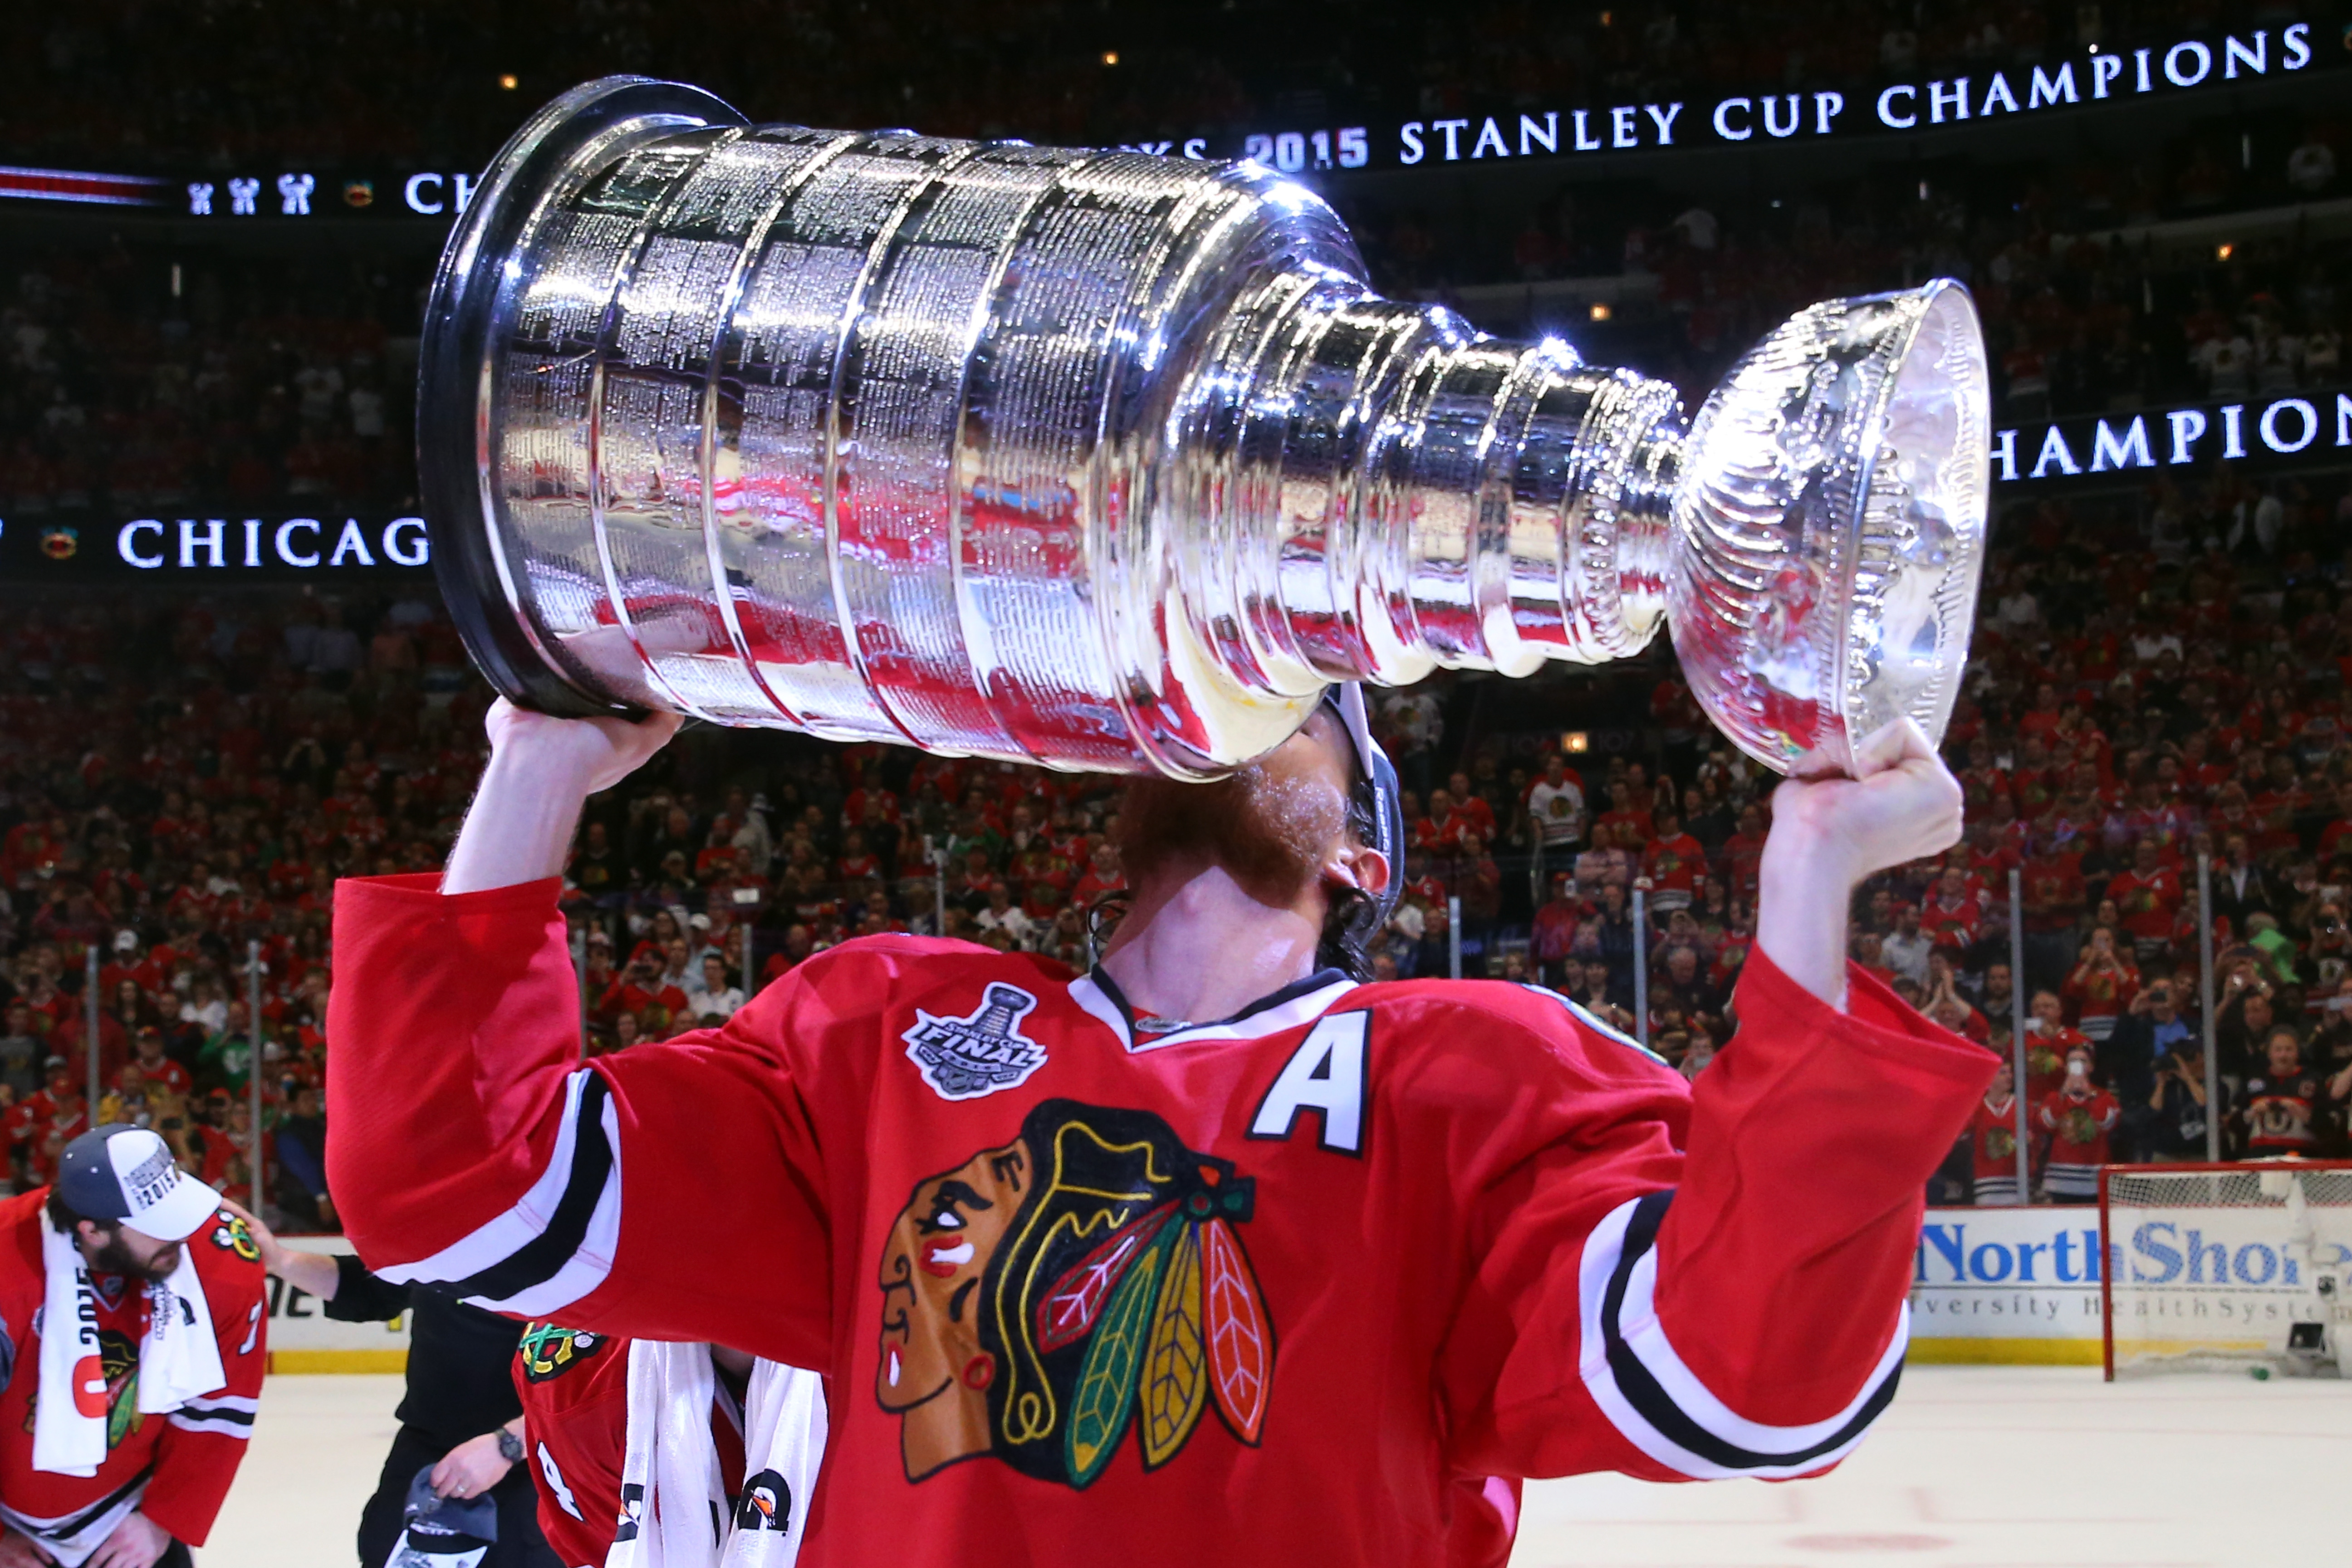 Duncan Keith of the Chicago Blackhawks celebrates by hoisting the Stanley Cup after defeating the Tampa Bay Lightning. Getty